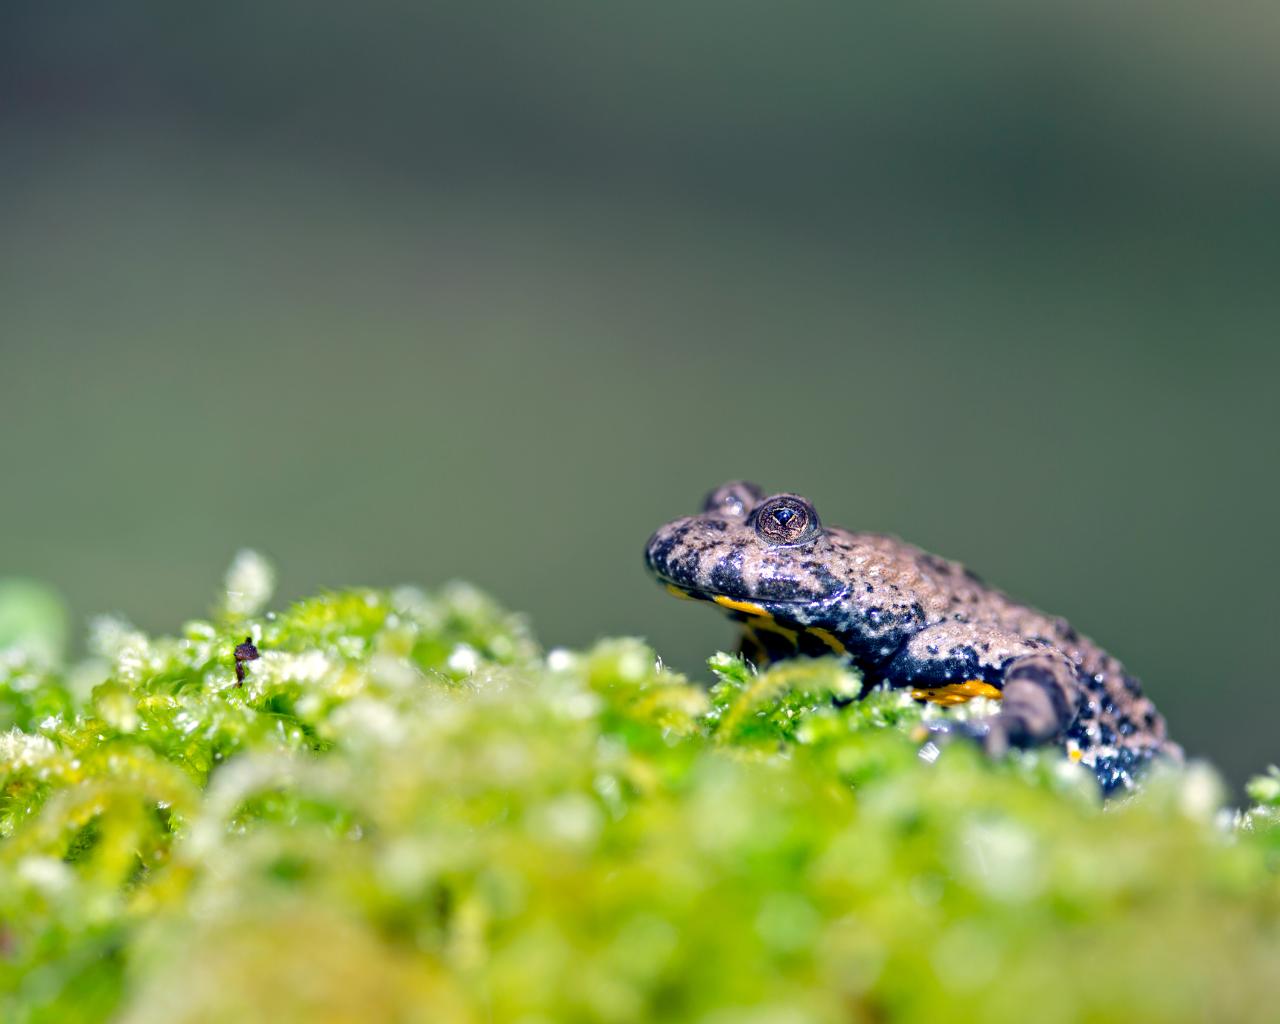 Yellow-bellied toad on moss cushion